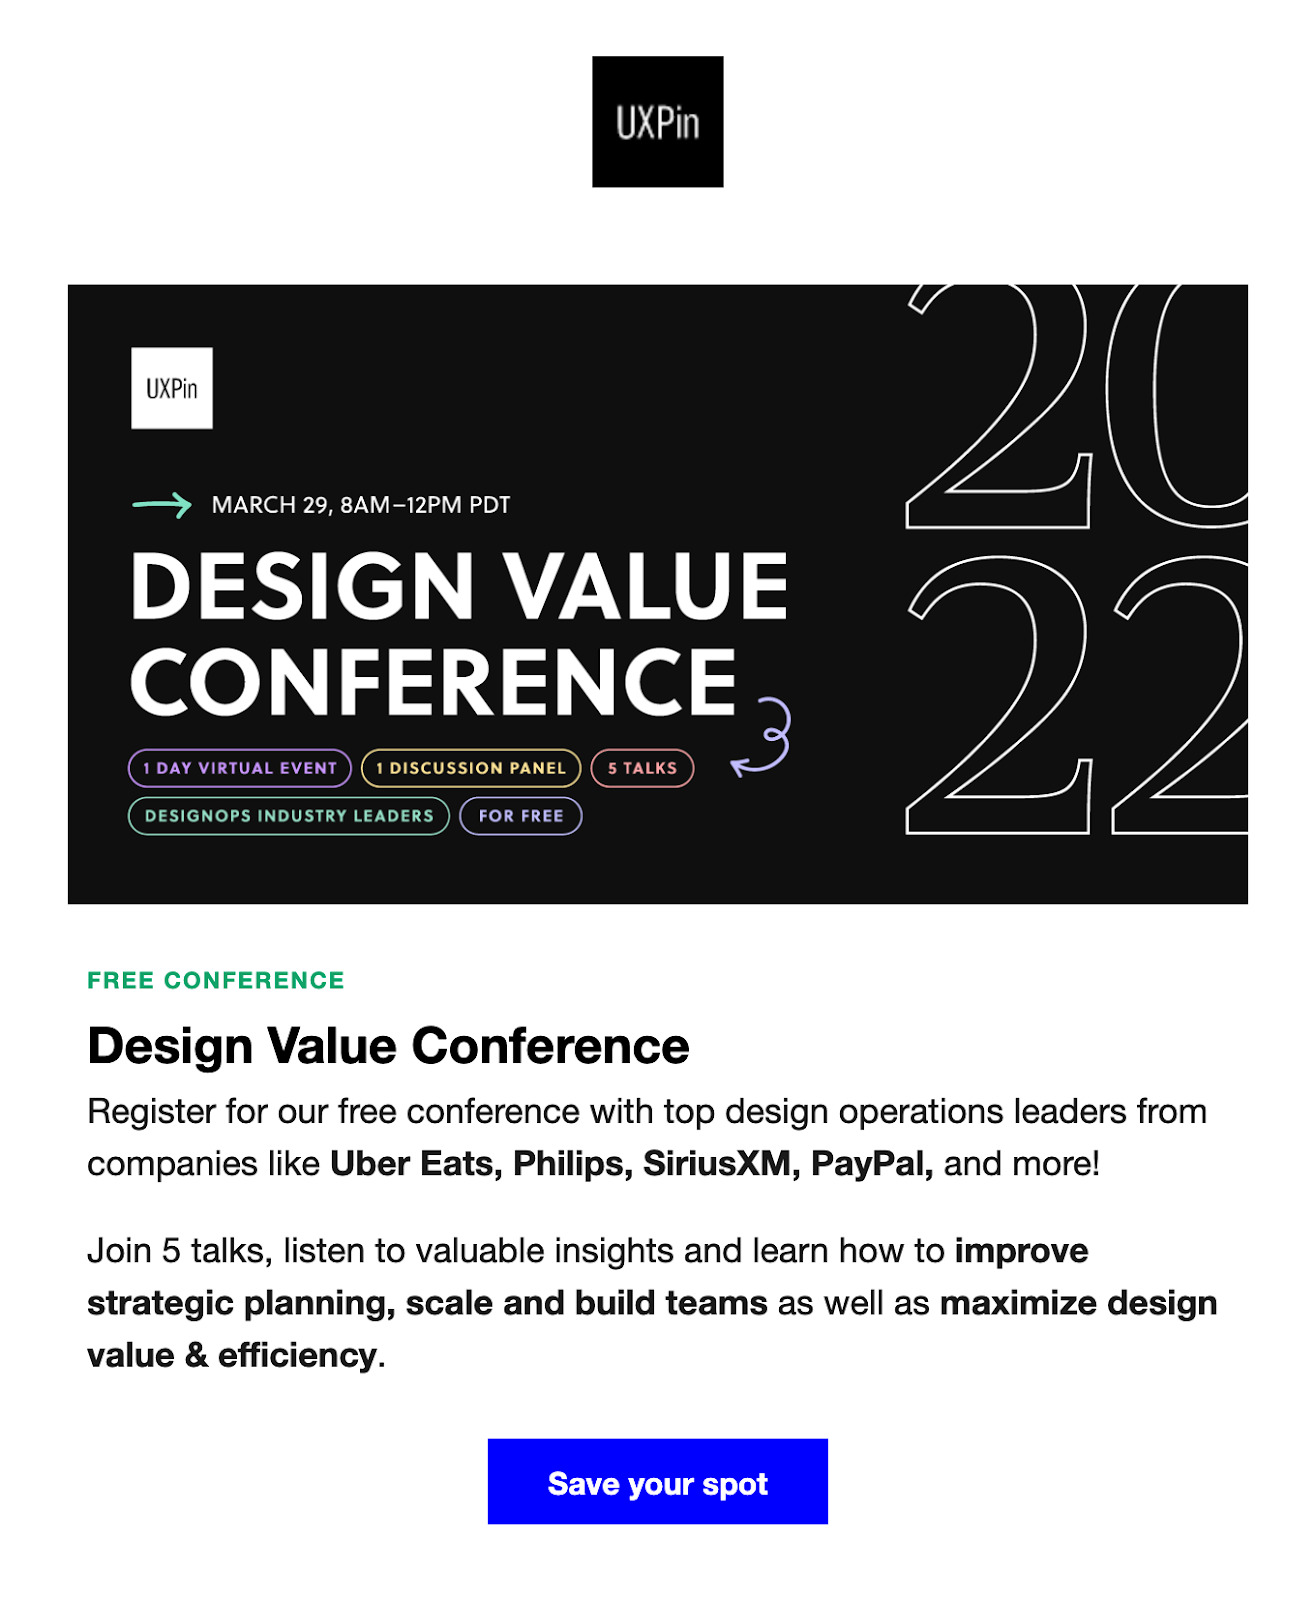 Write-up about Design Value Conference. Below that, a CTA button to click through and register